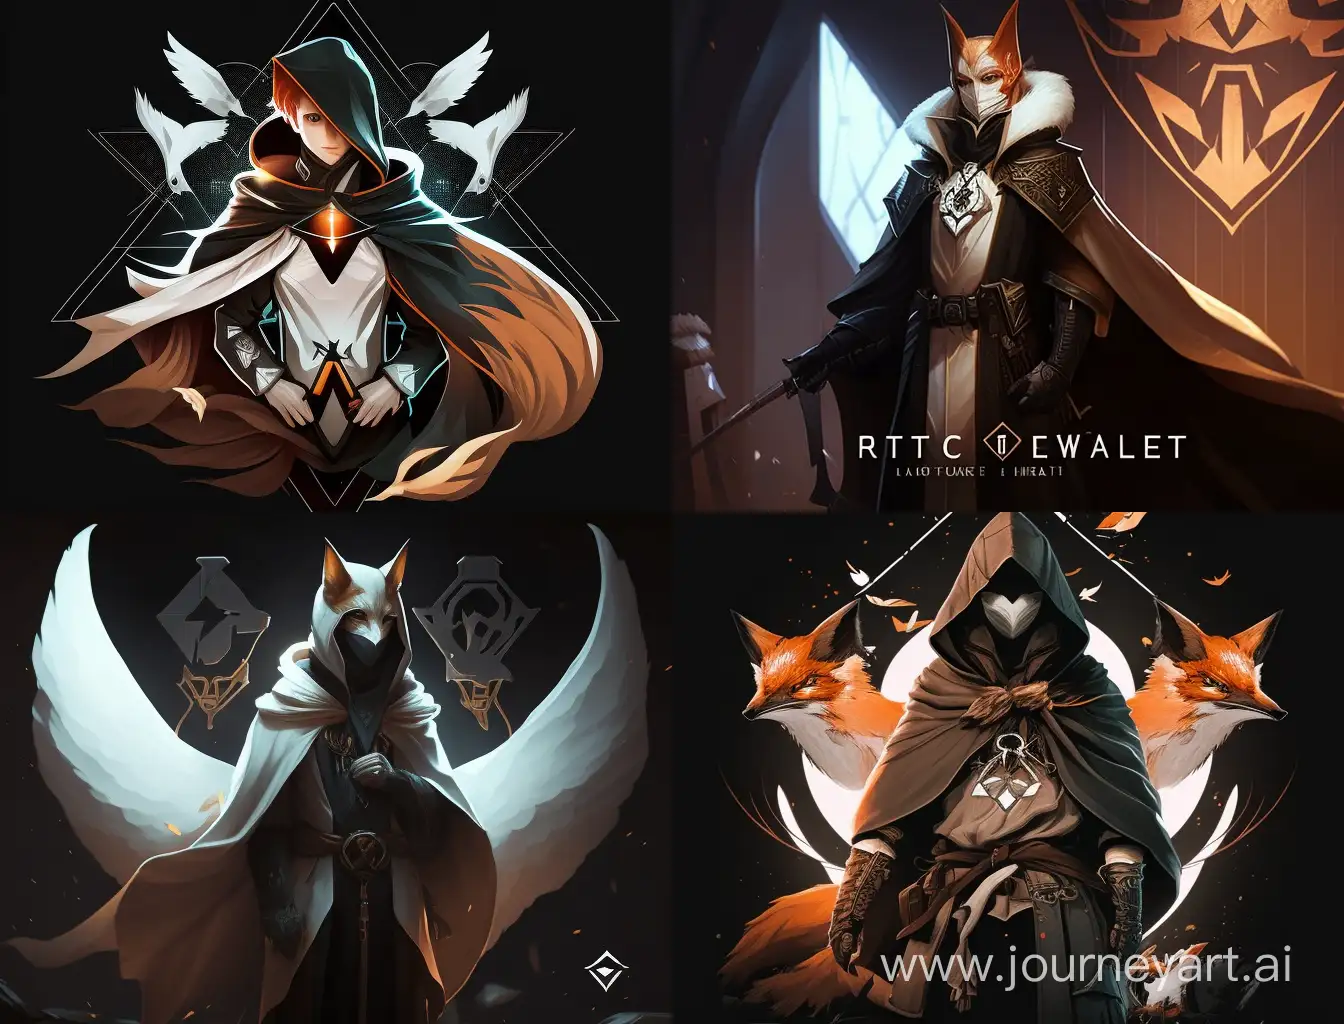 "Illustrate a male AI character wearing a white shirt and a knee-length black cloak, adorned with a fox symbol and a triangle as the logo for an esports team."